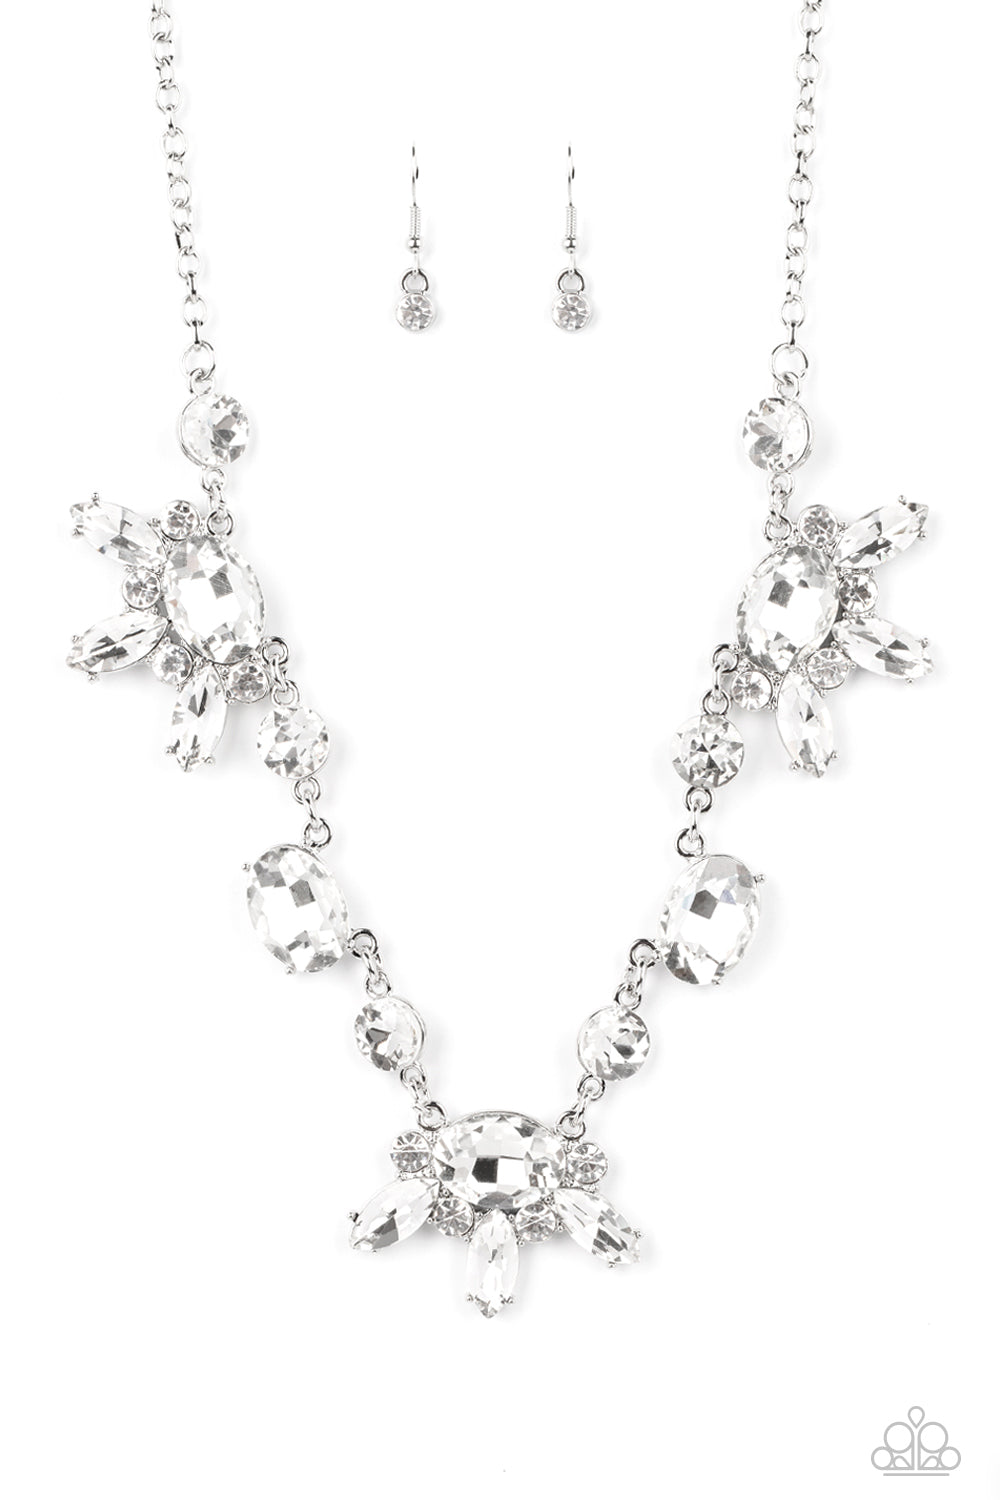 Paparazzi Accessories Glow-Trotting Twinkle - White Rhinestone Convention Necklaces brilliant white rhinestones in round, oval, and marquise cuts, create an abstract pattern as they fall along the neckline. The faceted surfaces of each gem catch and reflect light from every angle, resulting in a timelss, twinkling statement piece. Features an adjustable clasp closure.  Sold as one individual necklace. Includes one pair of matching earrings.  2022 Glow Convention 